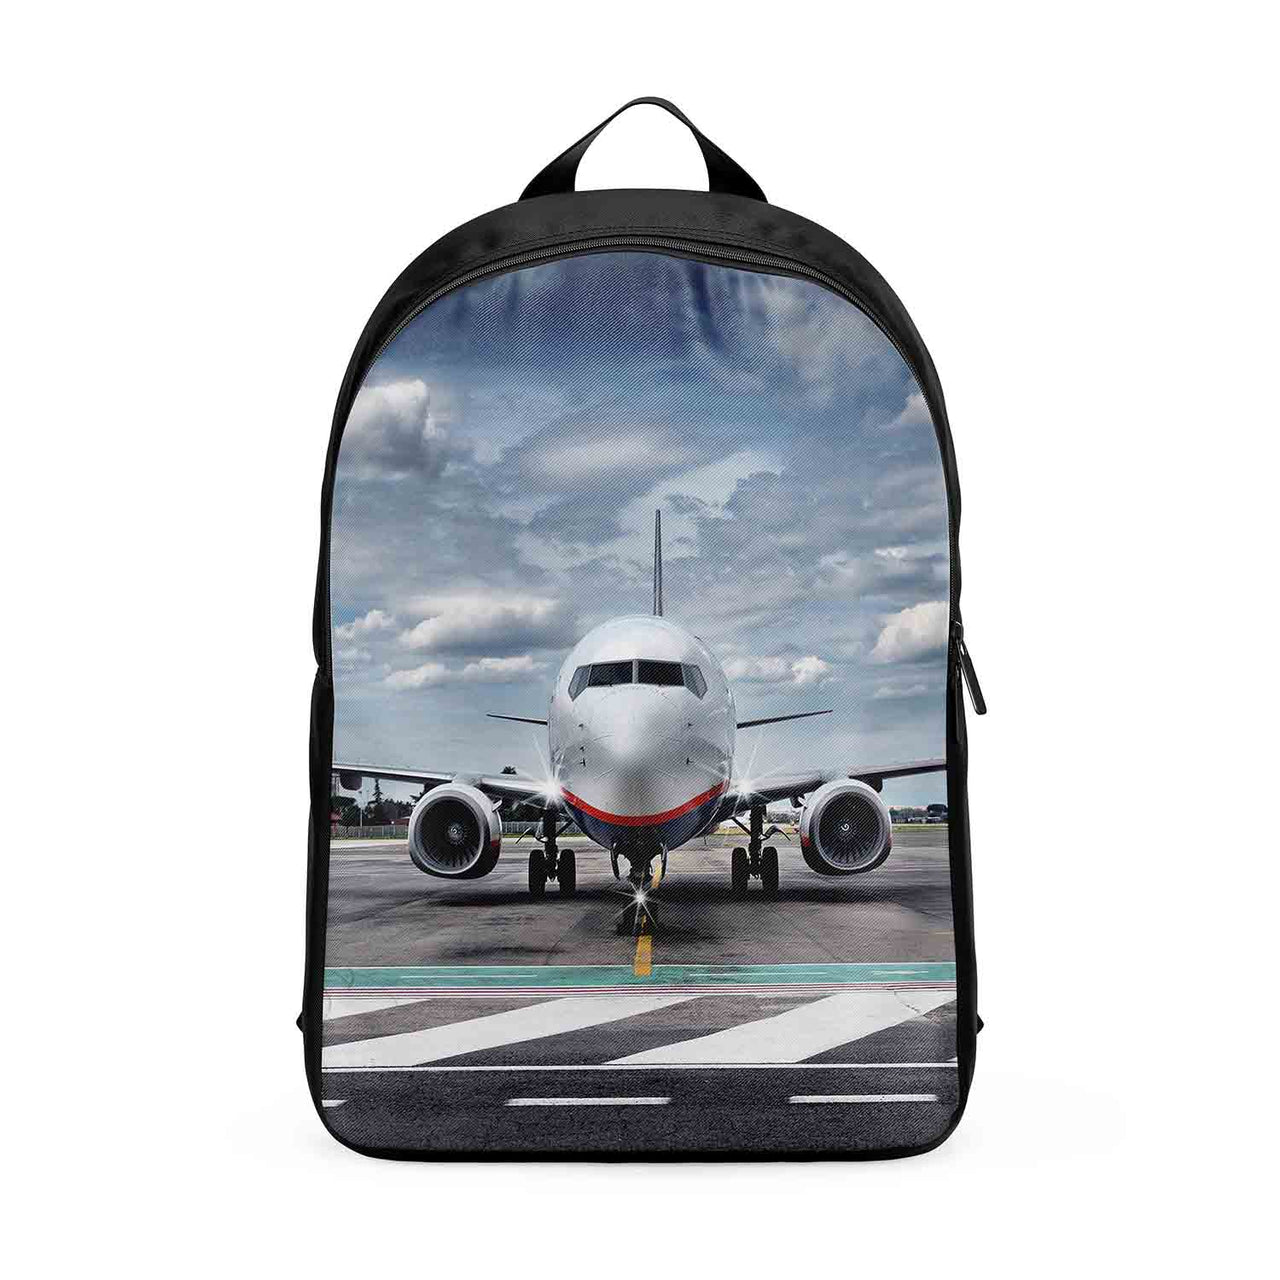 Amazing Clouds and Boeing 737 NG Designed Backpacks